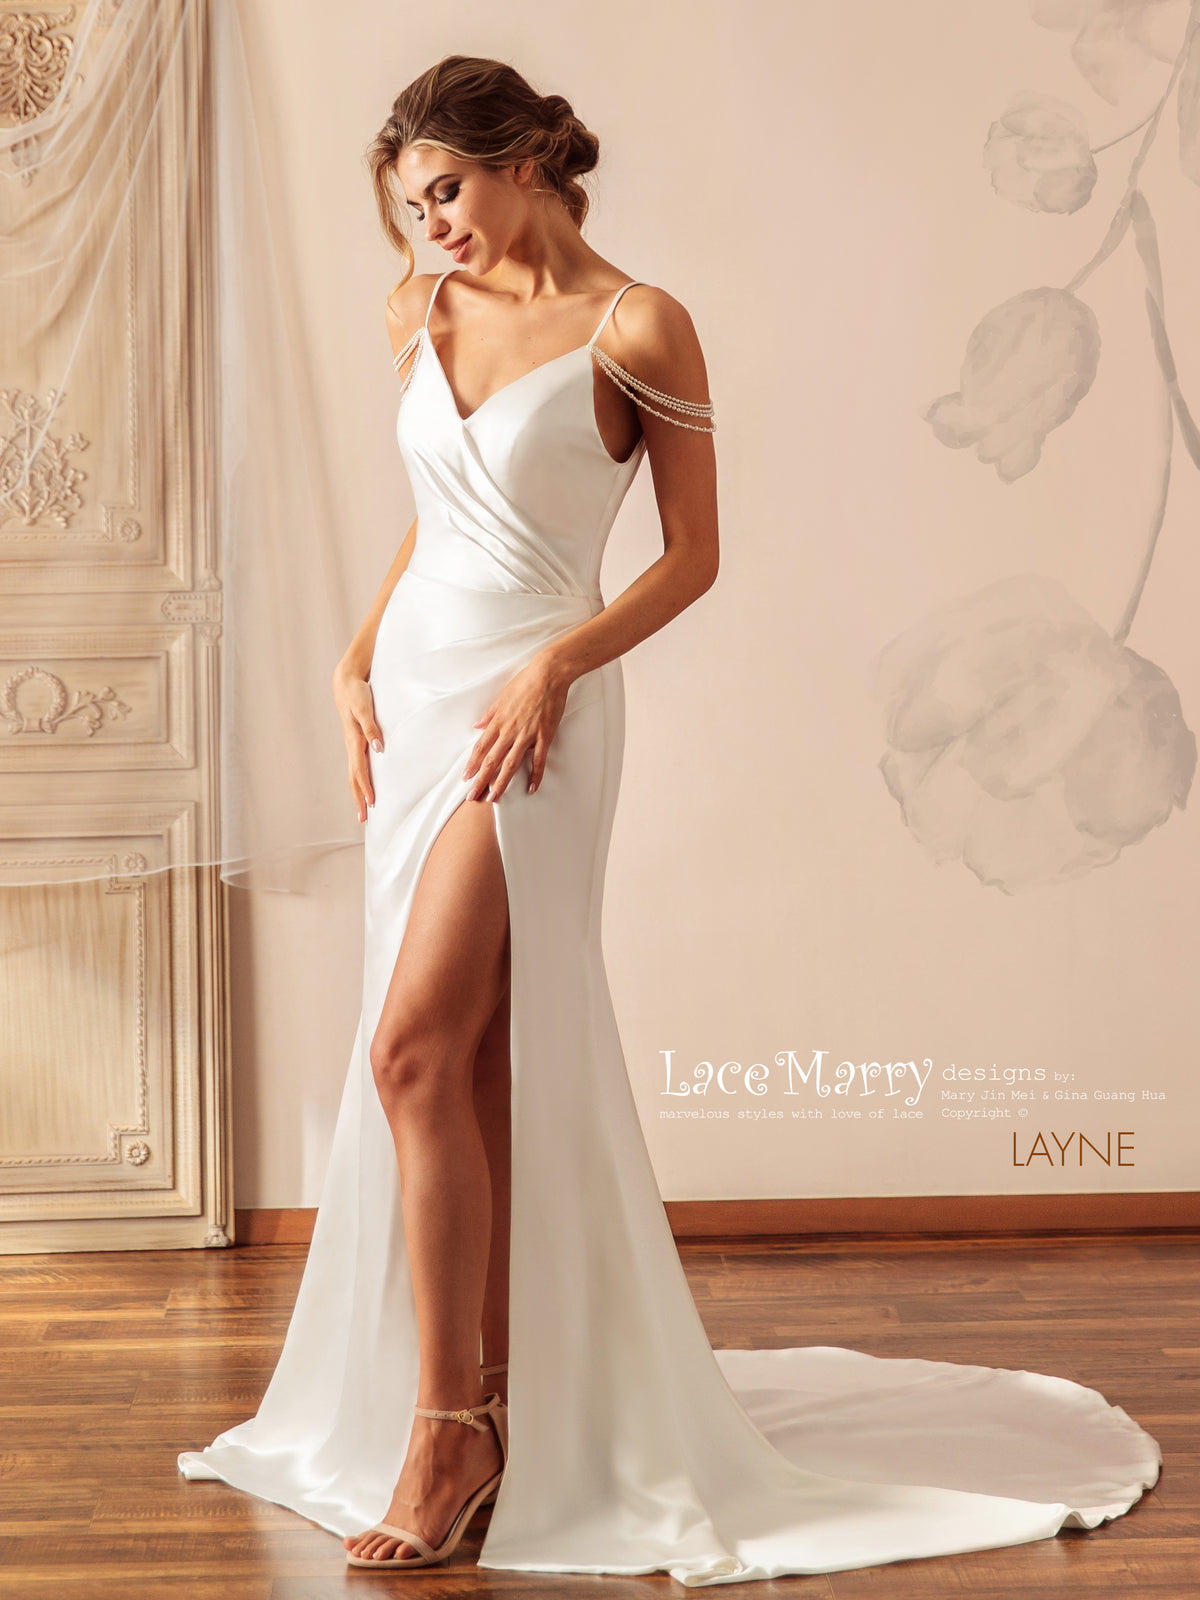 LAYNE / Sexy Plain Wedding Dress with Slit in the Skirt